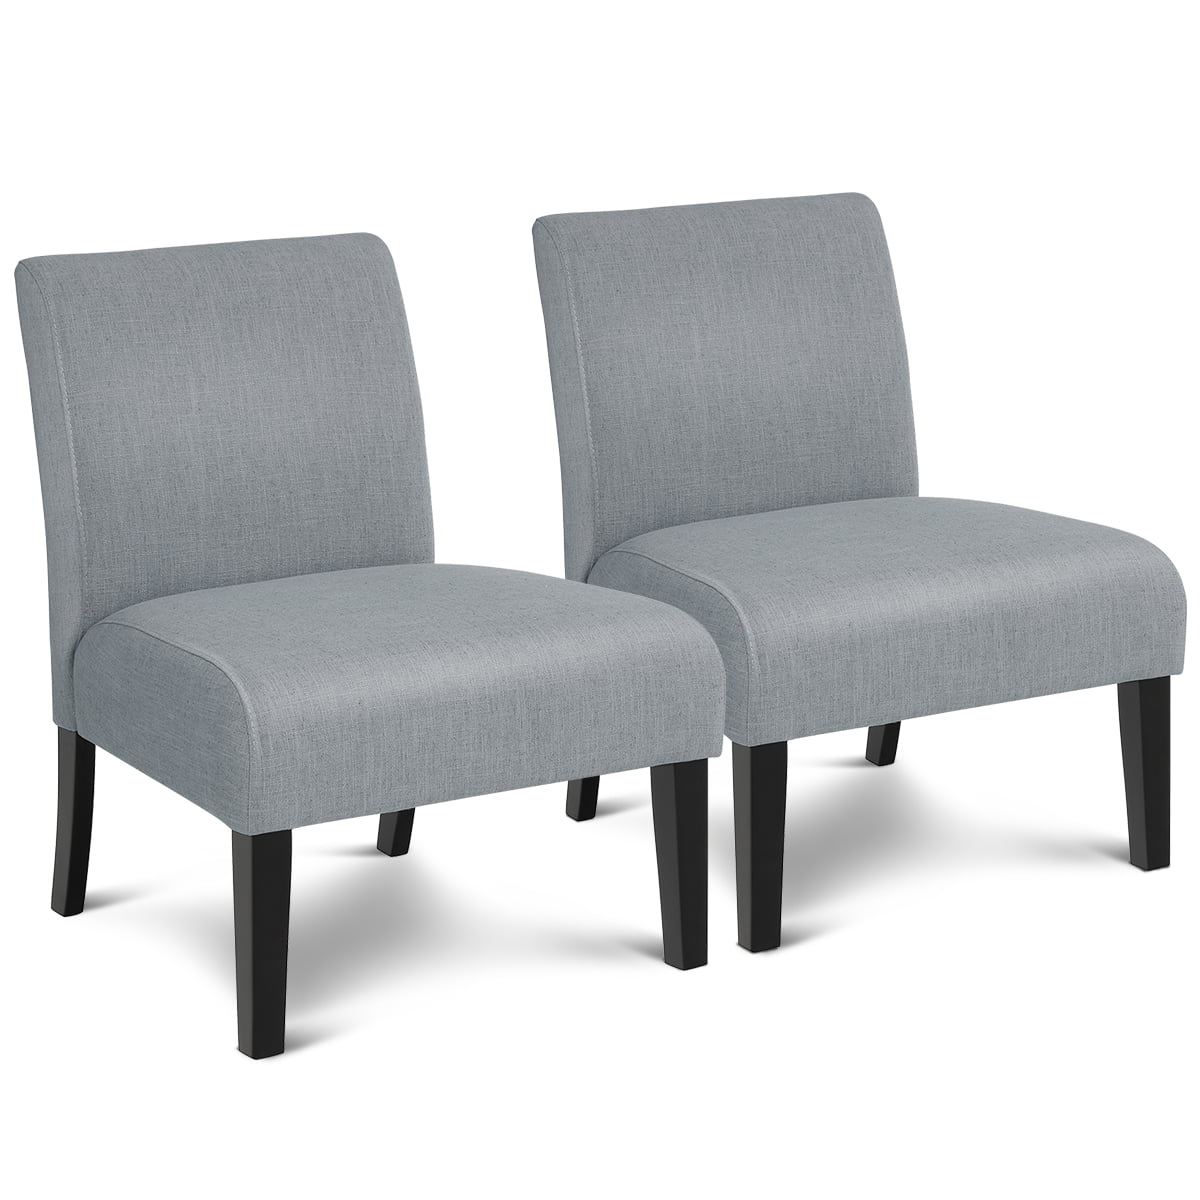 Modern Accent Chairs Set Of 2 Cheap for Simple Design